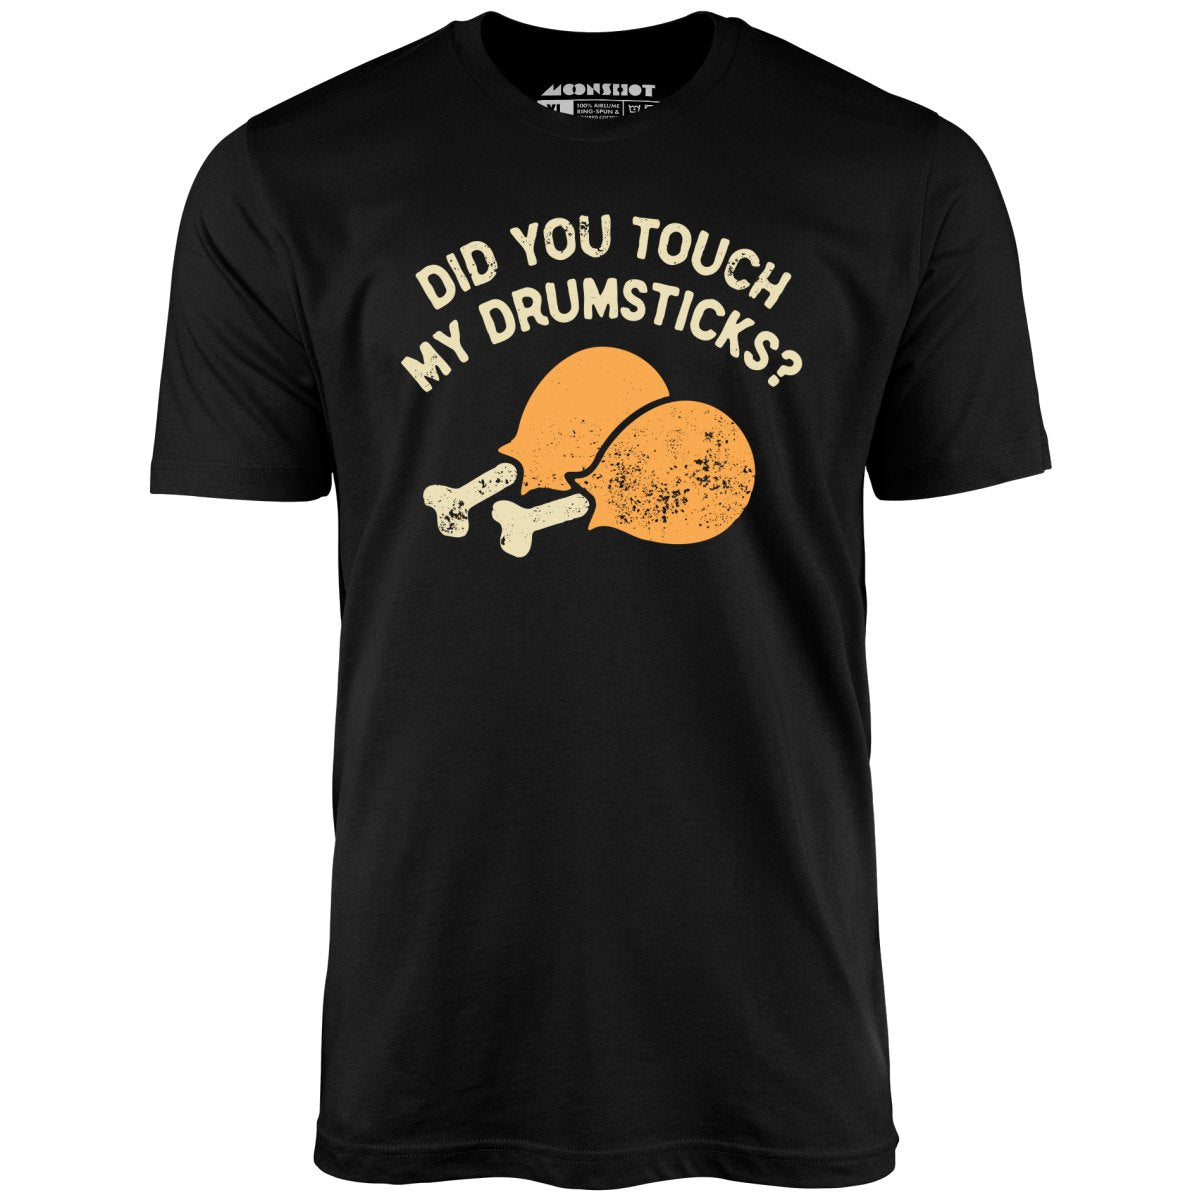 Did You Touch My Drumsticks? - Unisex T-Shirt